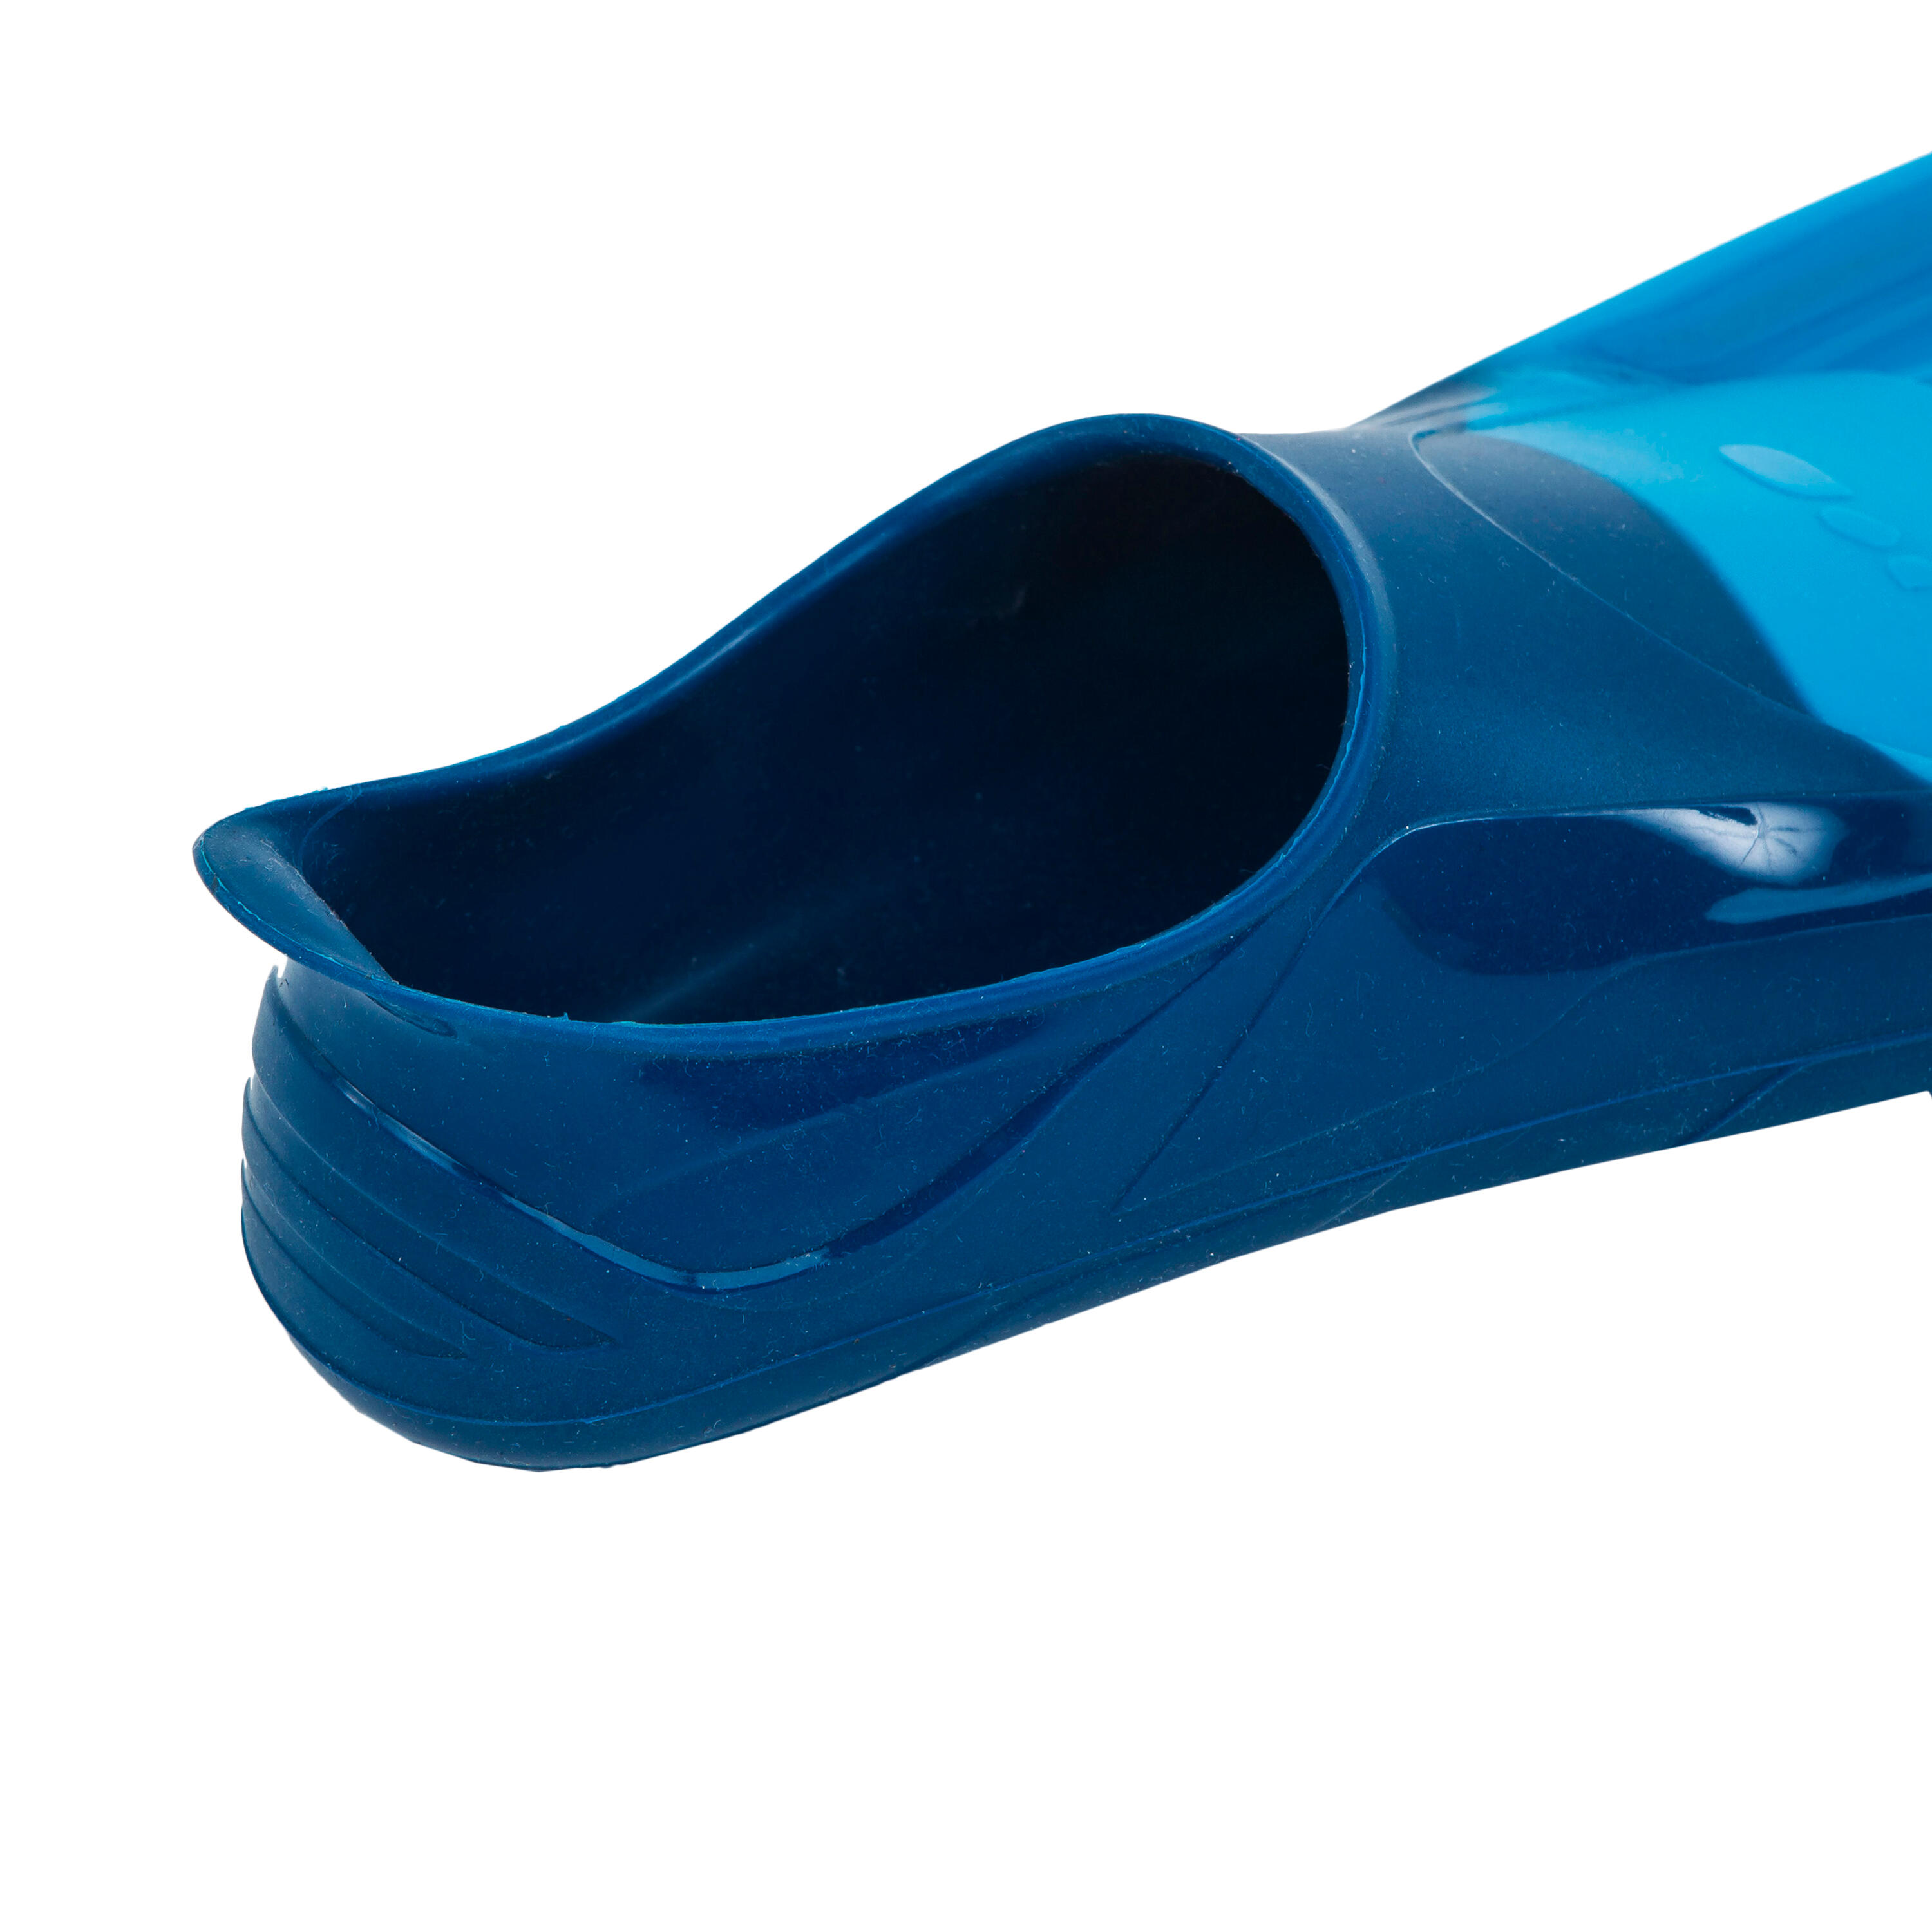 SILIFINS 500 SHORT SWIMMING FINS - 3 COLOURS NAVY BLUE/ BLUE/YELLOW 6/7